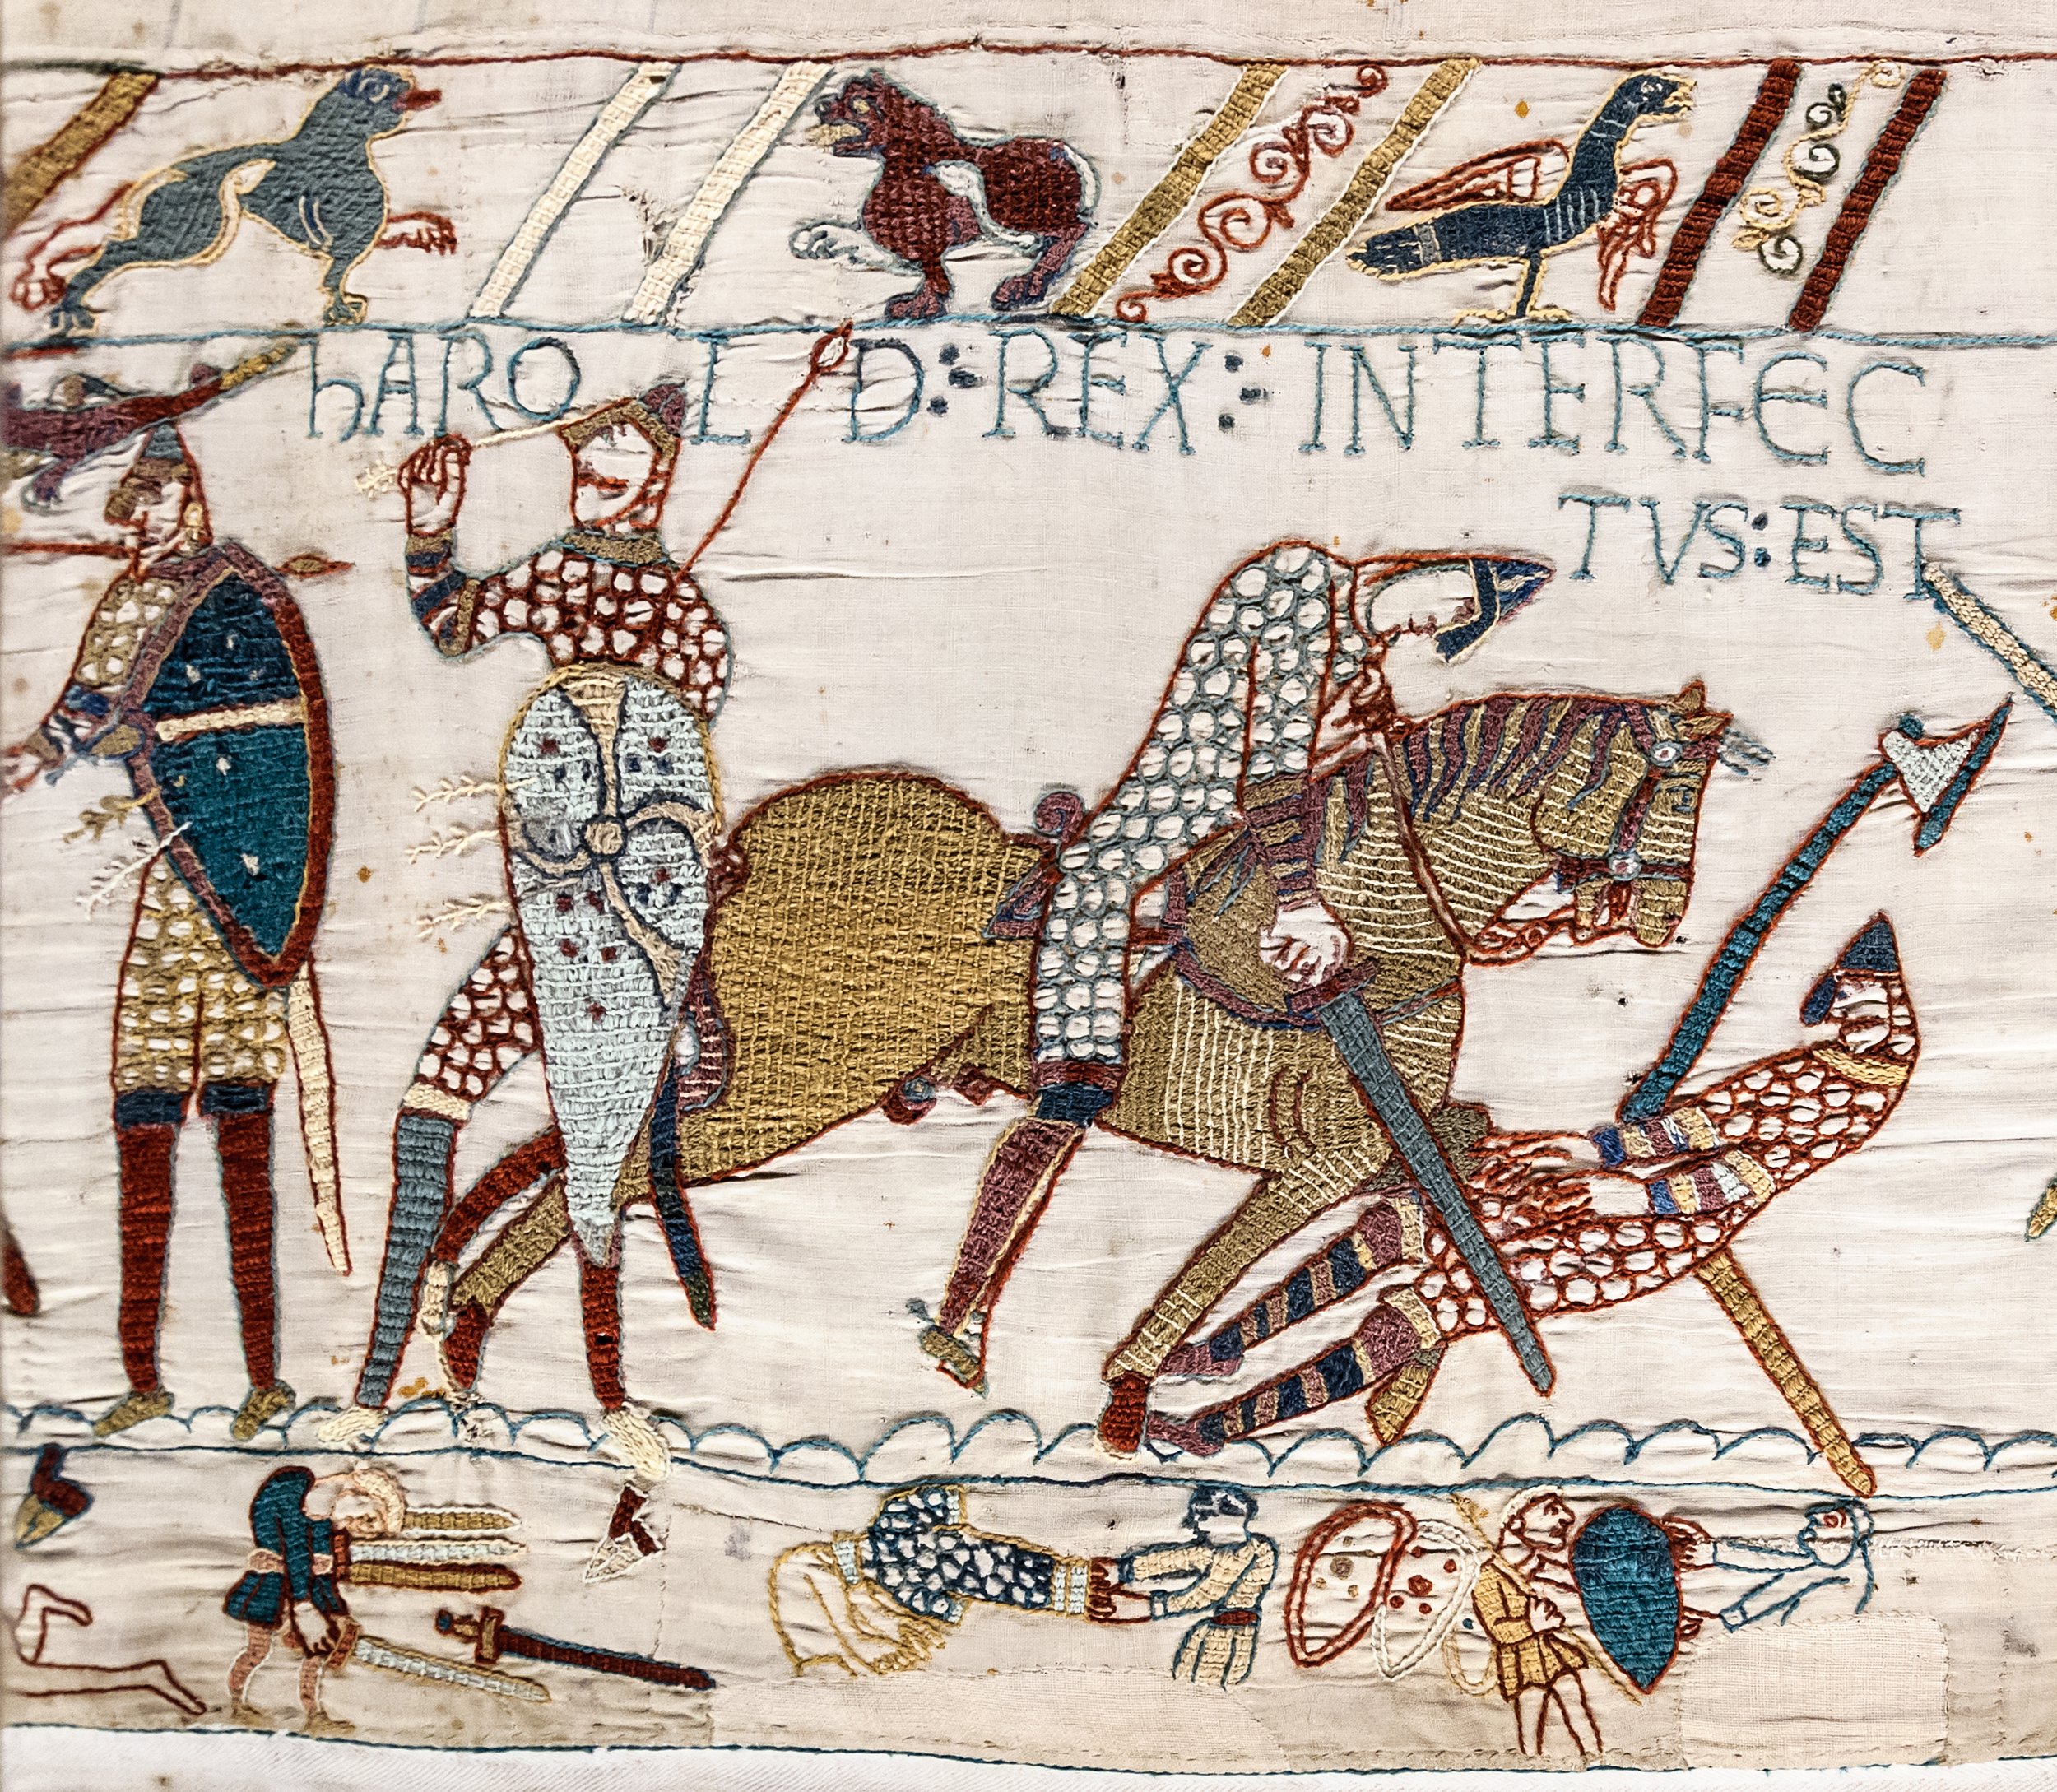  Bayeux Tapestry. Death of King Harold at the Battle of Hastings.